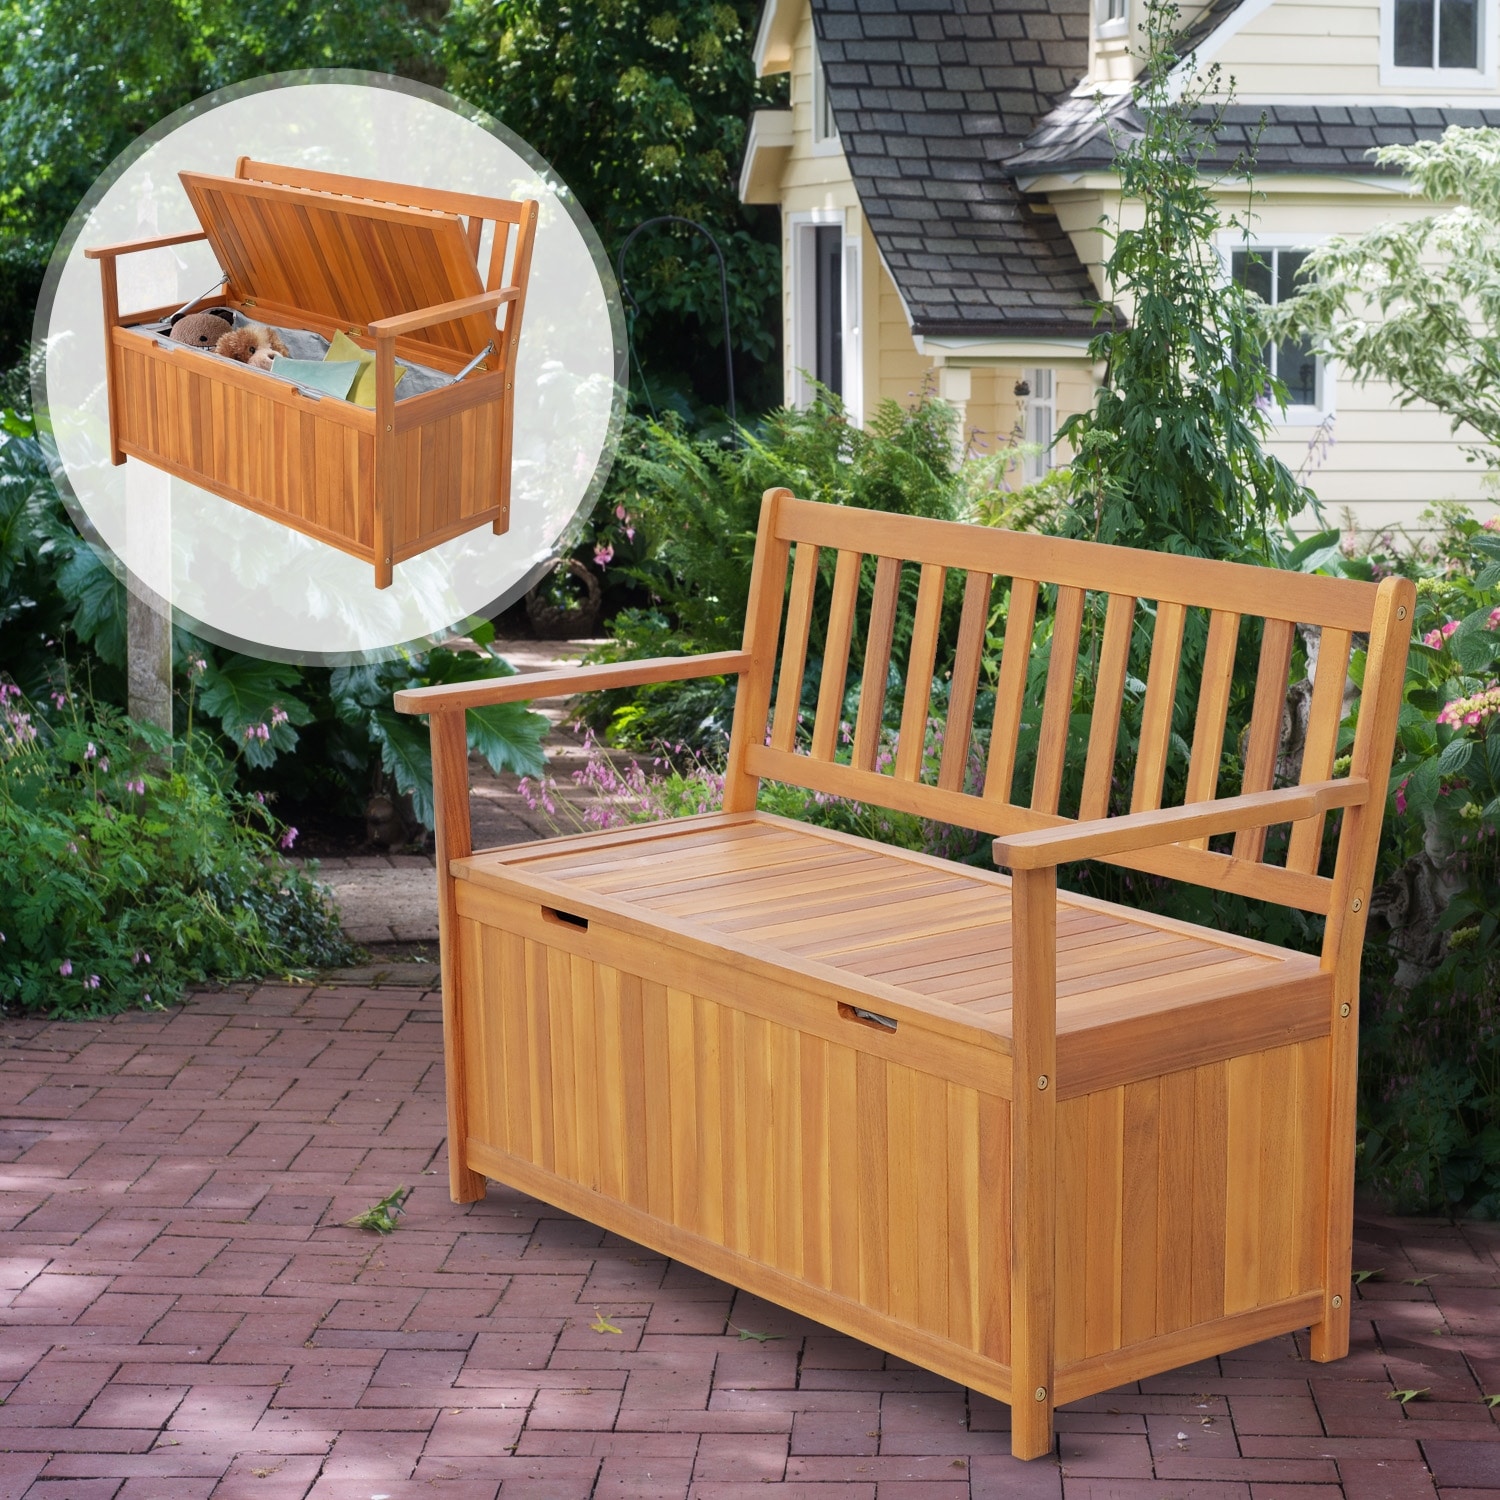 Outsunny 47 Wooden Outdoor Storage Bench With Removable Waterproof Lining On Sale Overstock 22435431